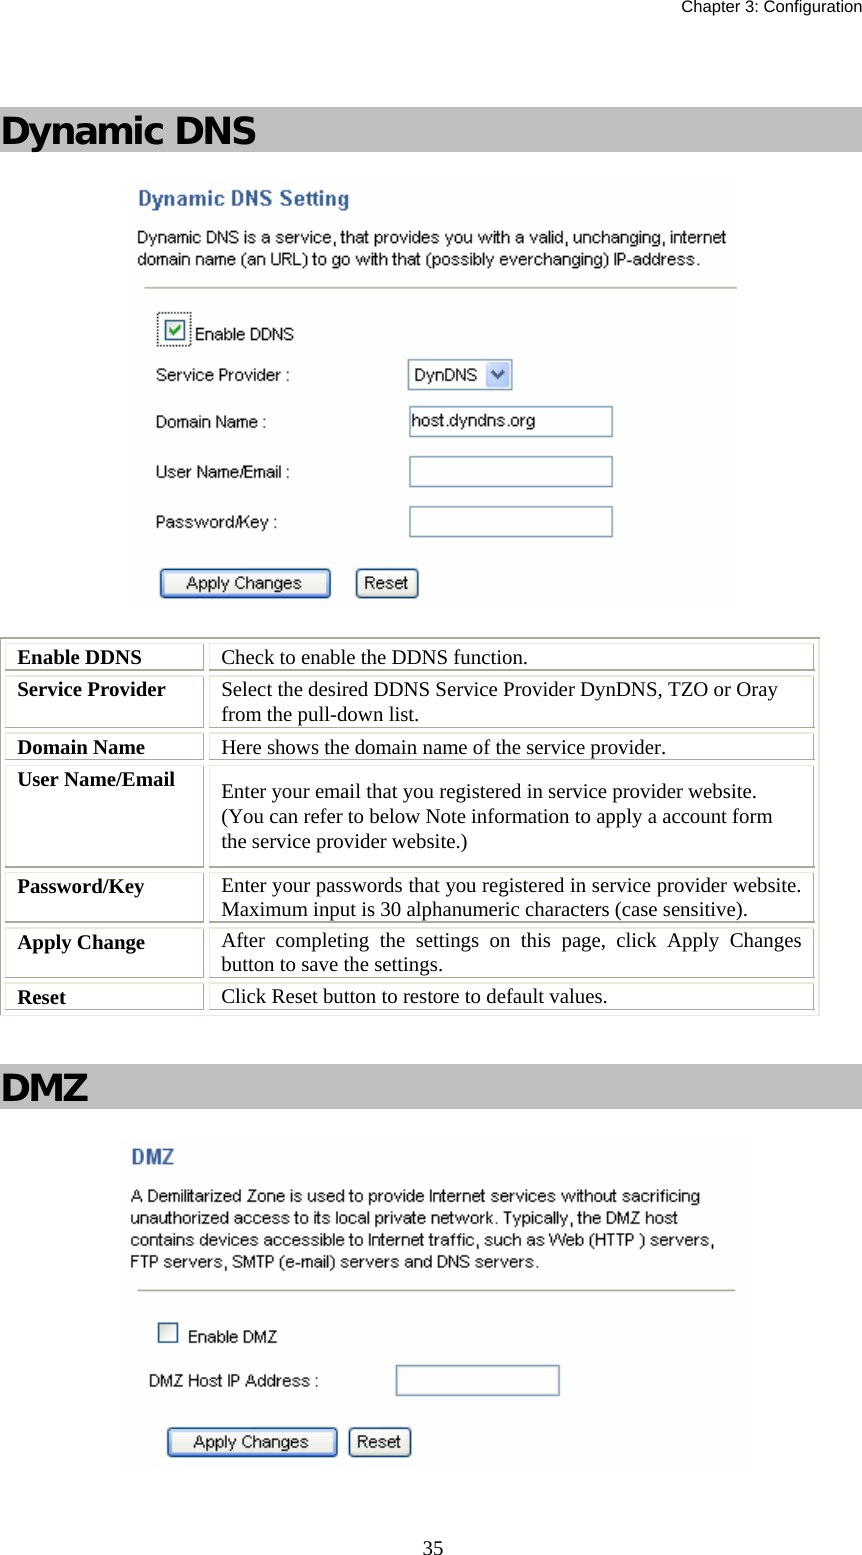   Chapter 3: Configuration  35  Dynamic DNS  Enable DDNS  Check to enable the DDNS function. Service Provider  Select the desired DDNS Service Provider DynDNS, TZO or Oray from the pull-down list.  Domain Name  Here shows the domain name of the service provider. User Name/Email  Enter your email that you registered in service provider website. (You can refer to below Note information to apply a account form the service provider website.) Password/Key  Enter your passwords that you registered in service provider website. Maximum input is 30 alphanumeric characters (case sensitive). Apply Change  After completing the settings on this page, click Apply Changes button to save the settings. Reset  Click Reset button to restore to default values.   DMZ   